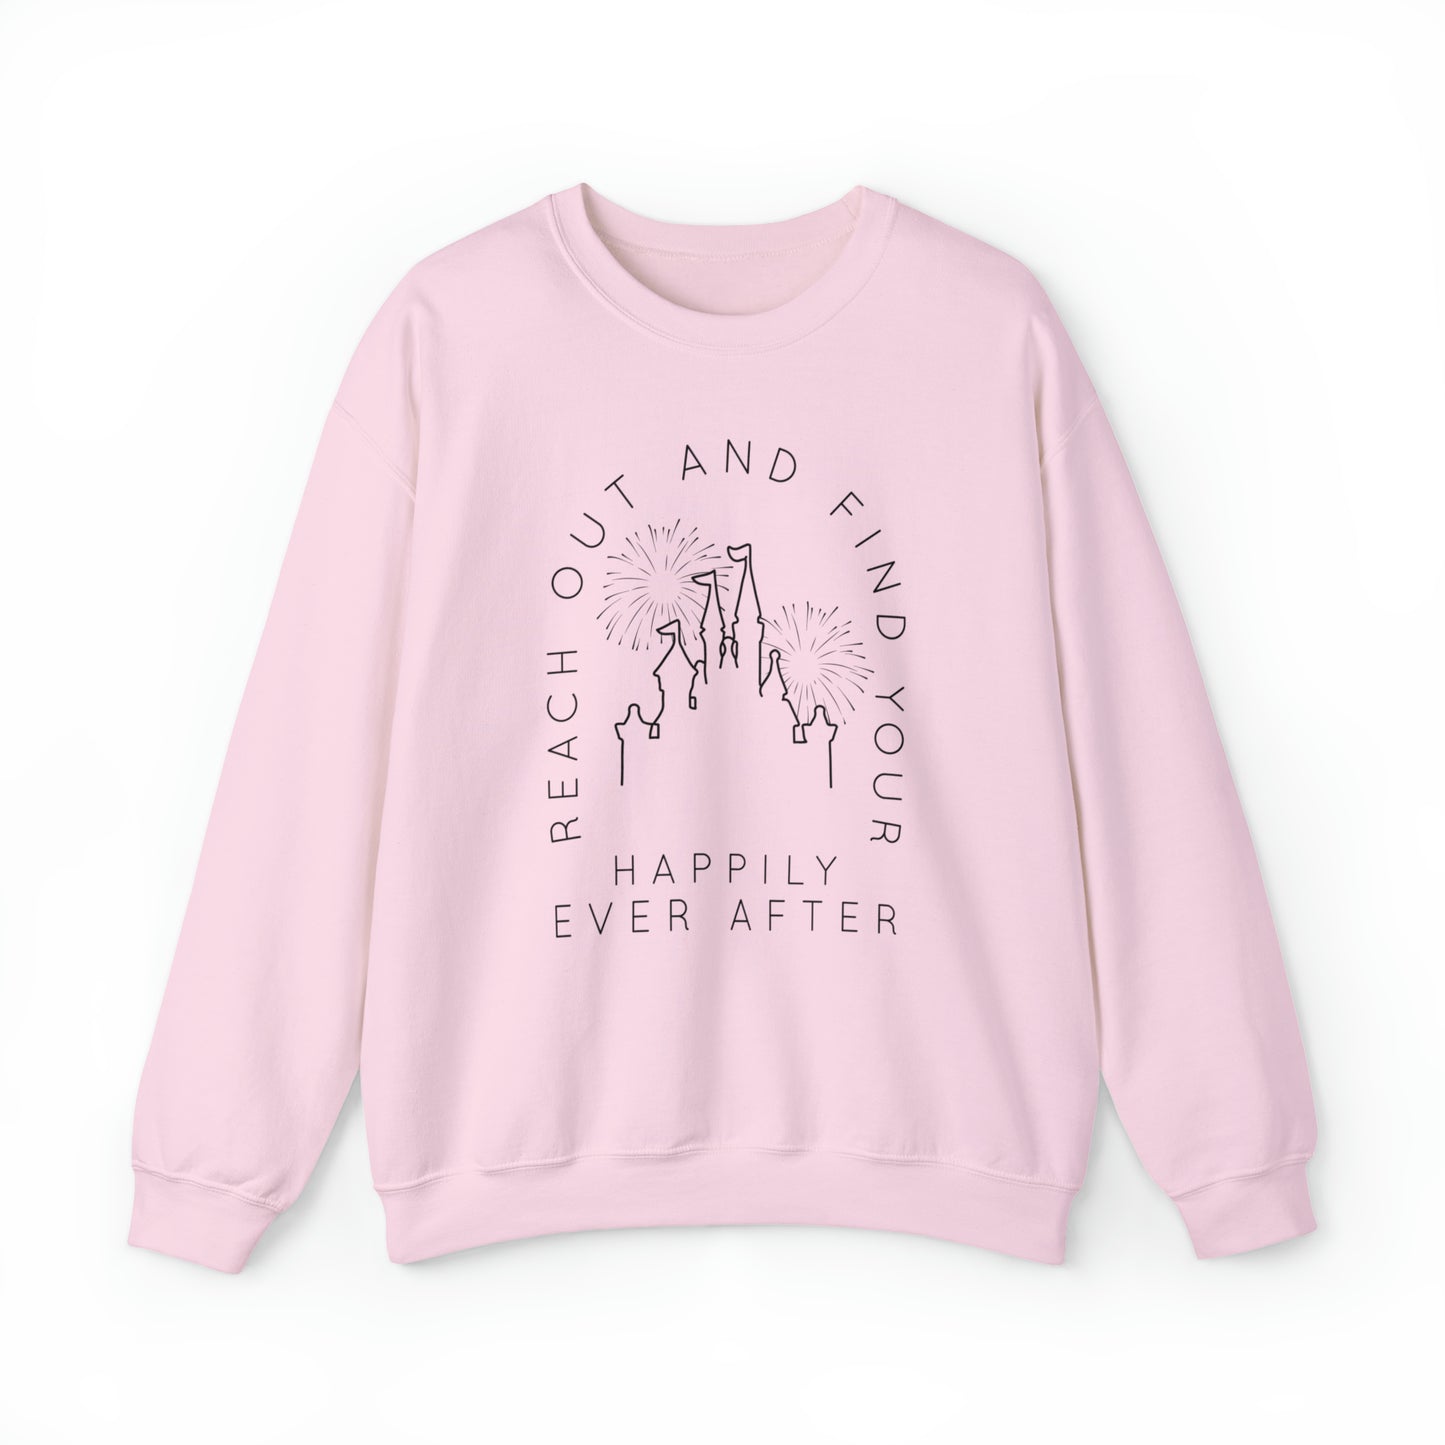 Reach Out And Find Your Happily Ever After Gildan Unisex Heavy Blend™ Crewneck Sweatshirt